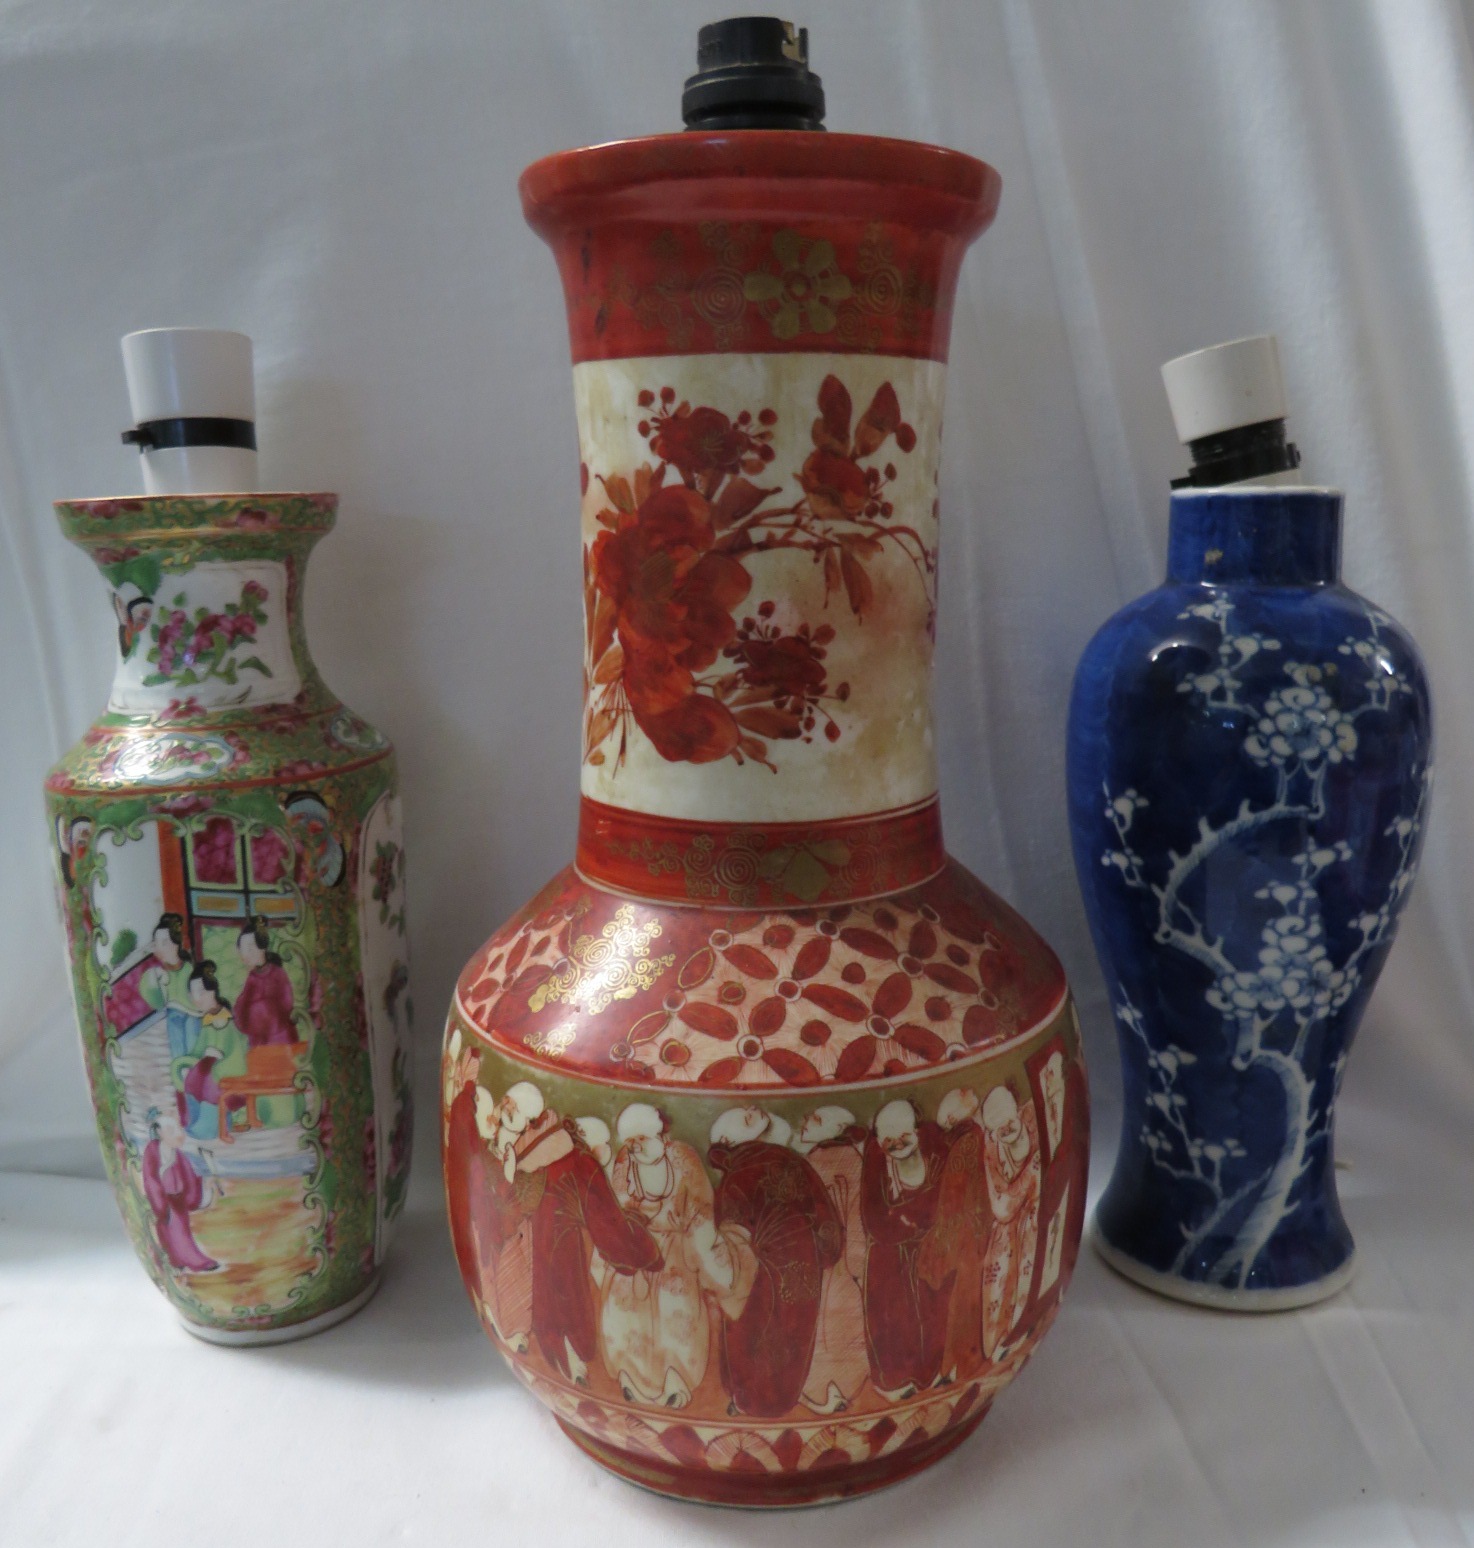 Three Chinese and Japanese porcelain vases converted to table lamps - the first a bottle vase